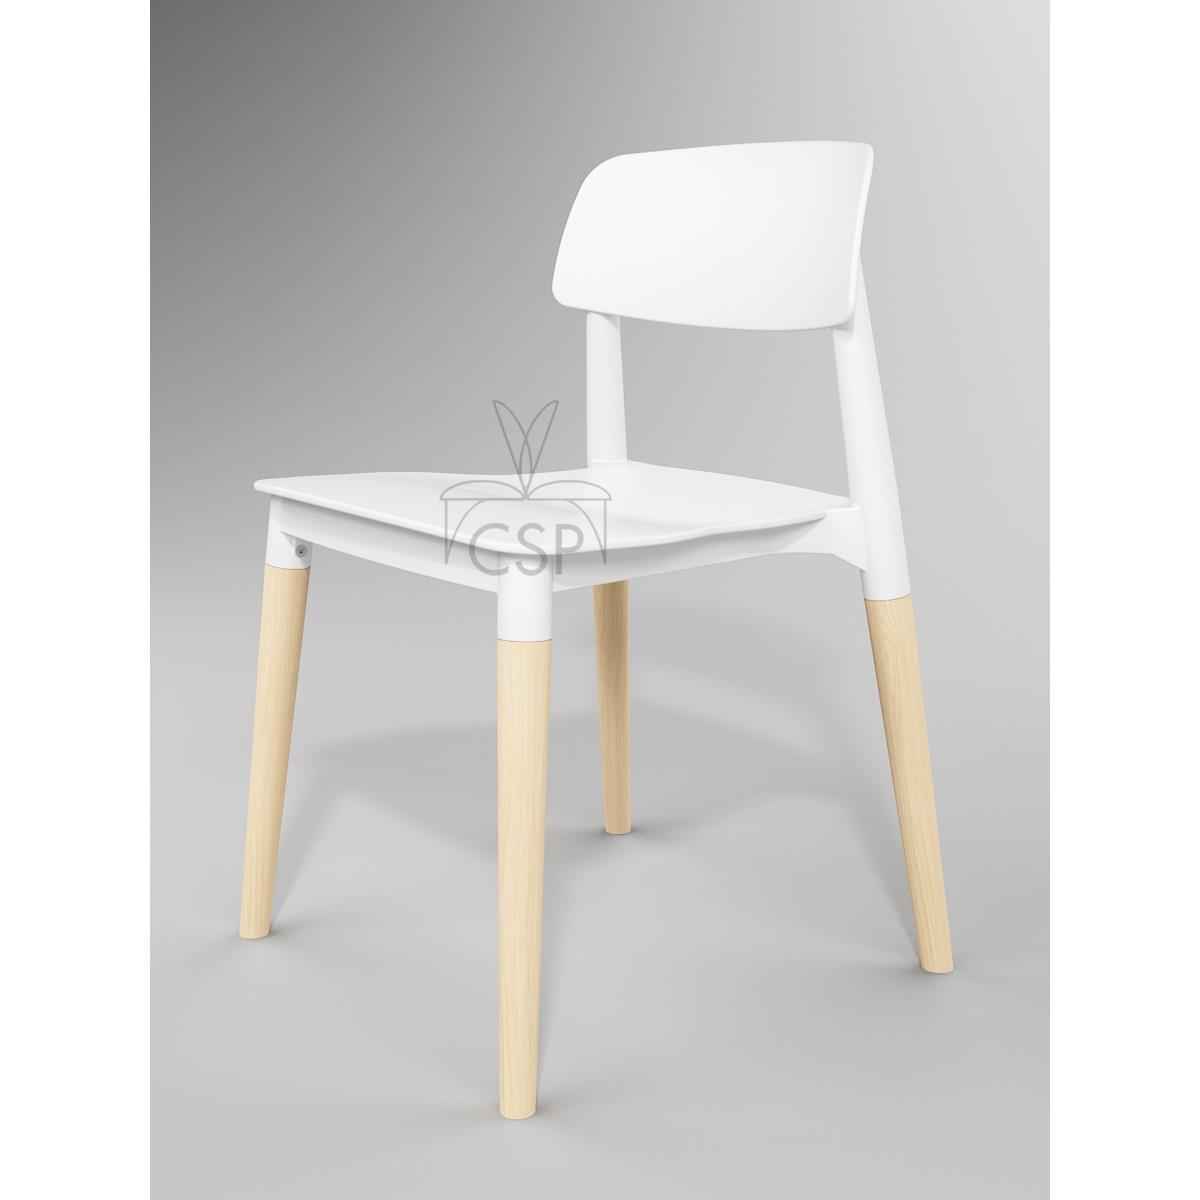 Cdpw1002-zsfp-wh Mid Century Modern Side Chair - White - 30 In.